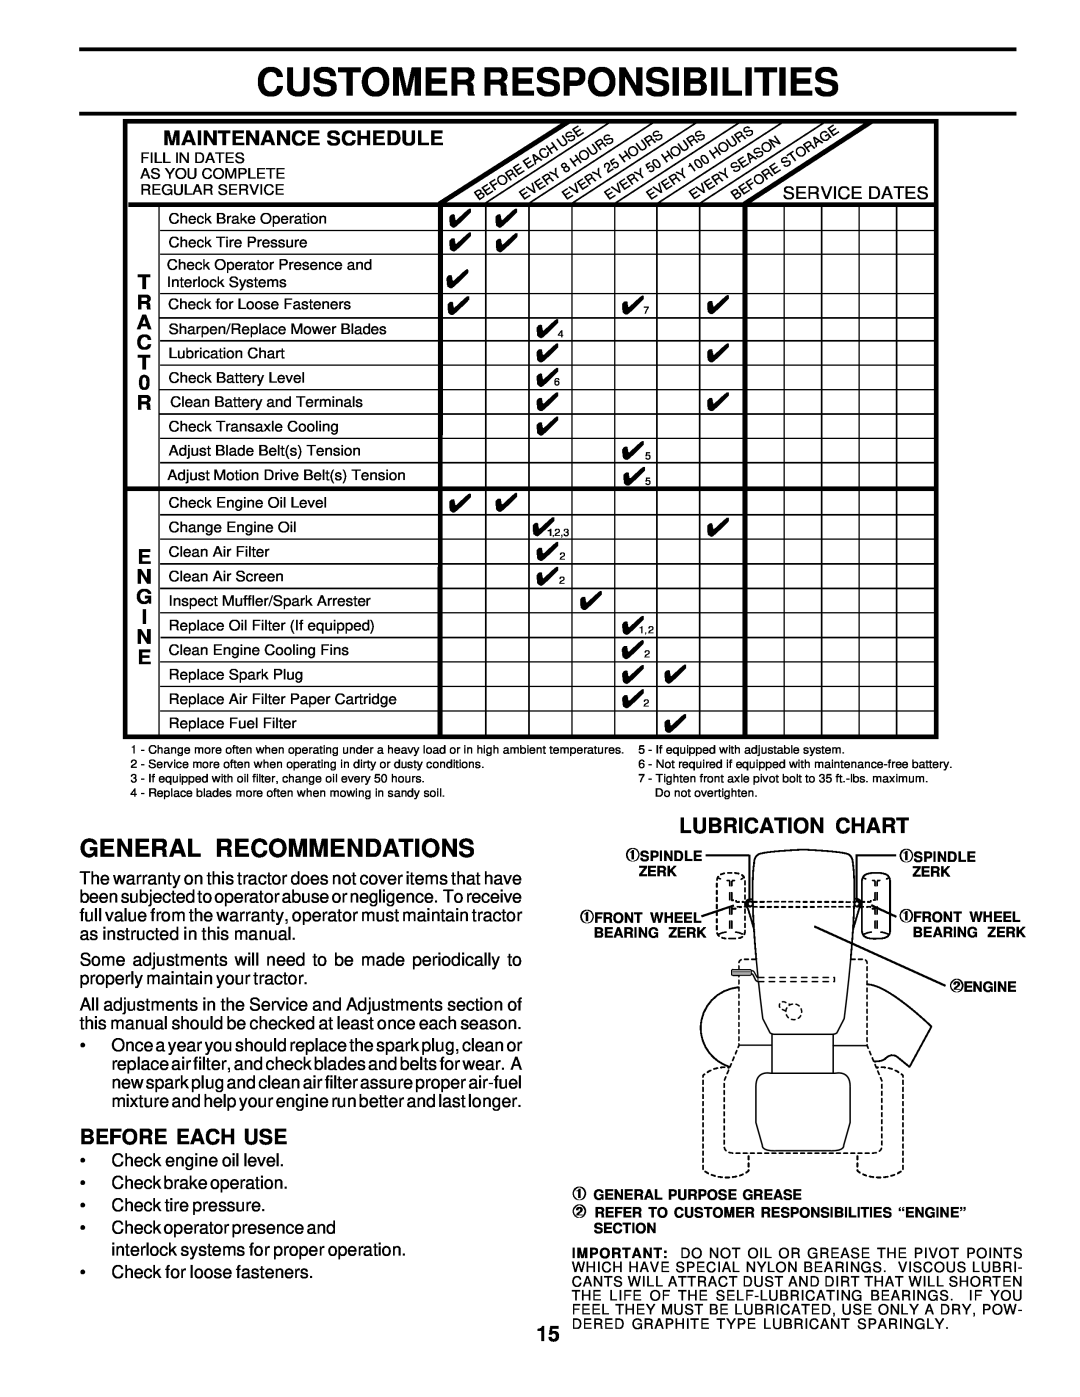 Weed Eater S165H42A owner manual Customer Responsibilities, General Recommendations, ¿Lubrication Chart, Before Each Use 